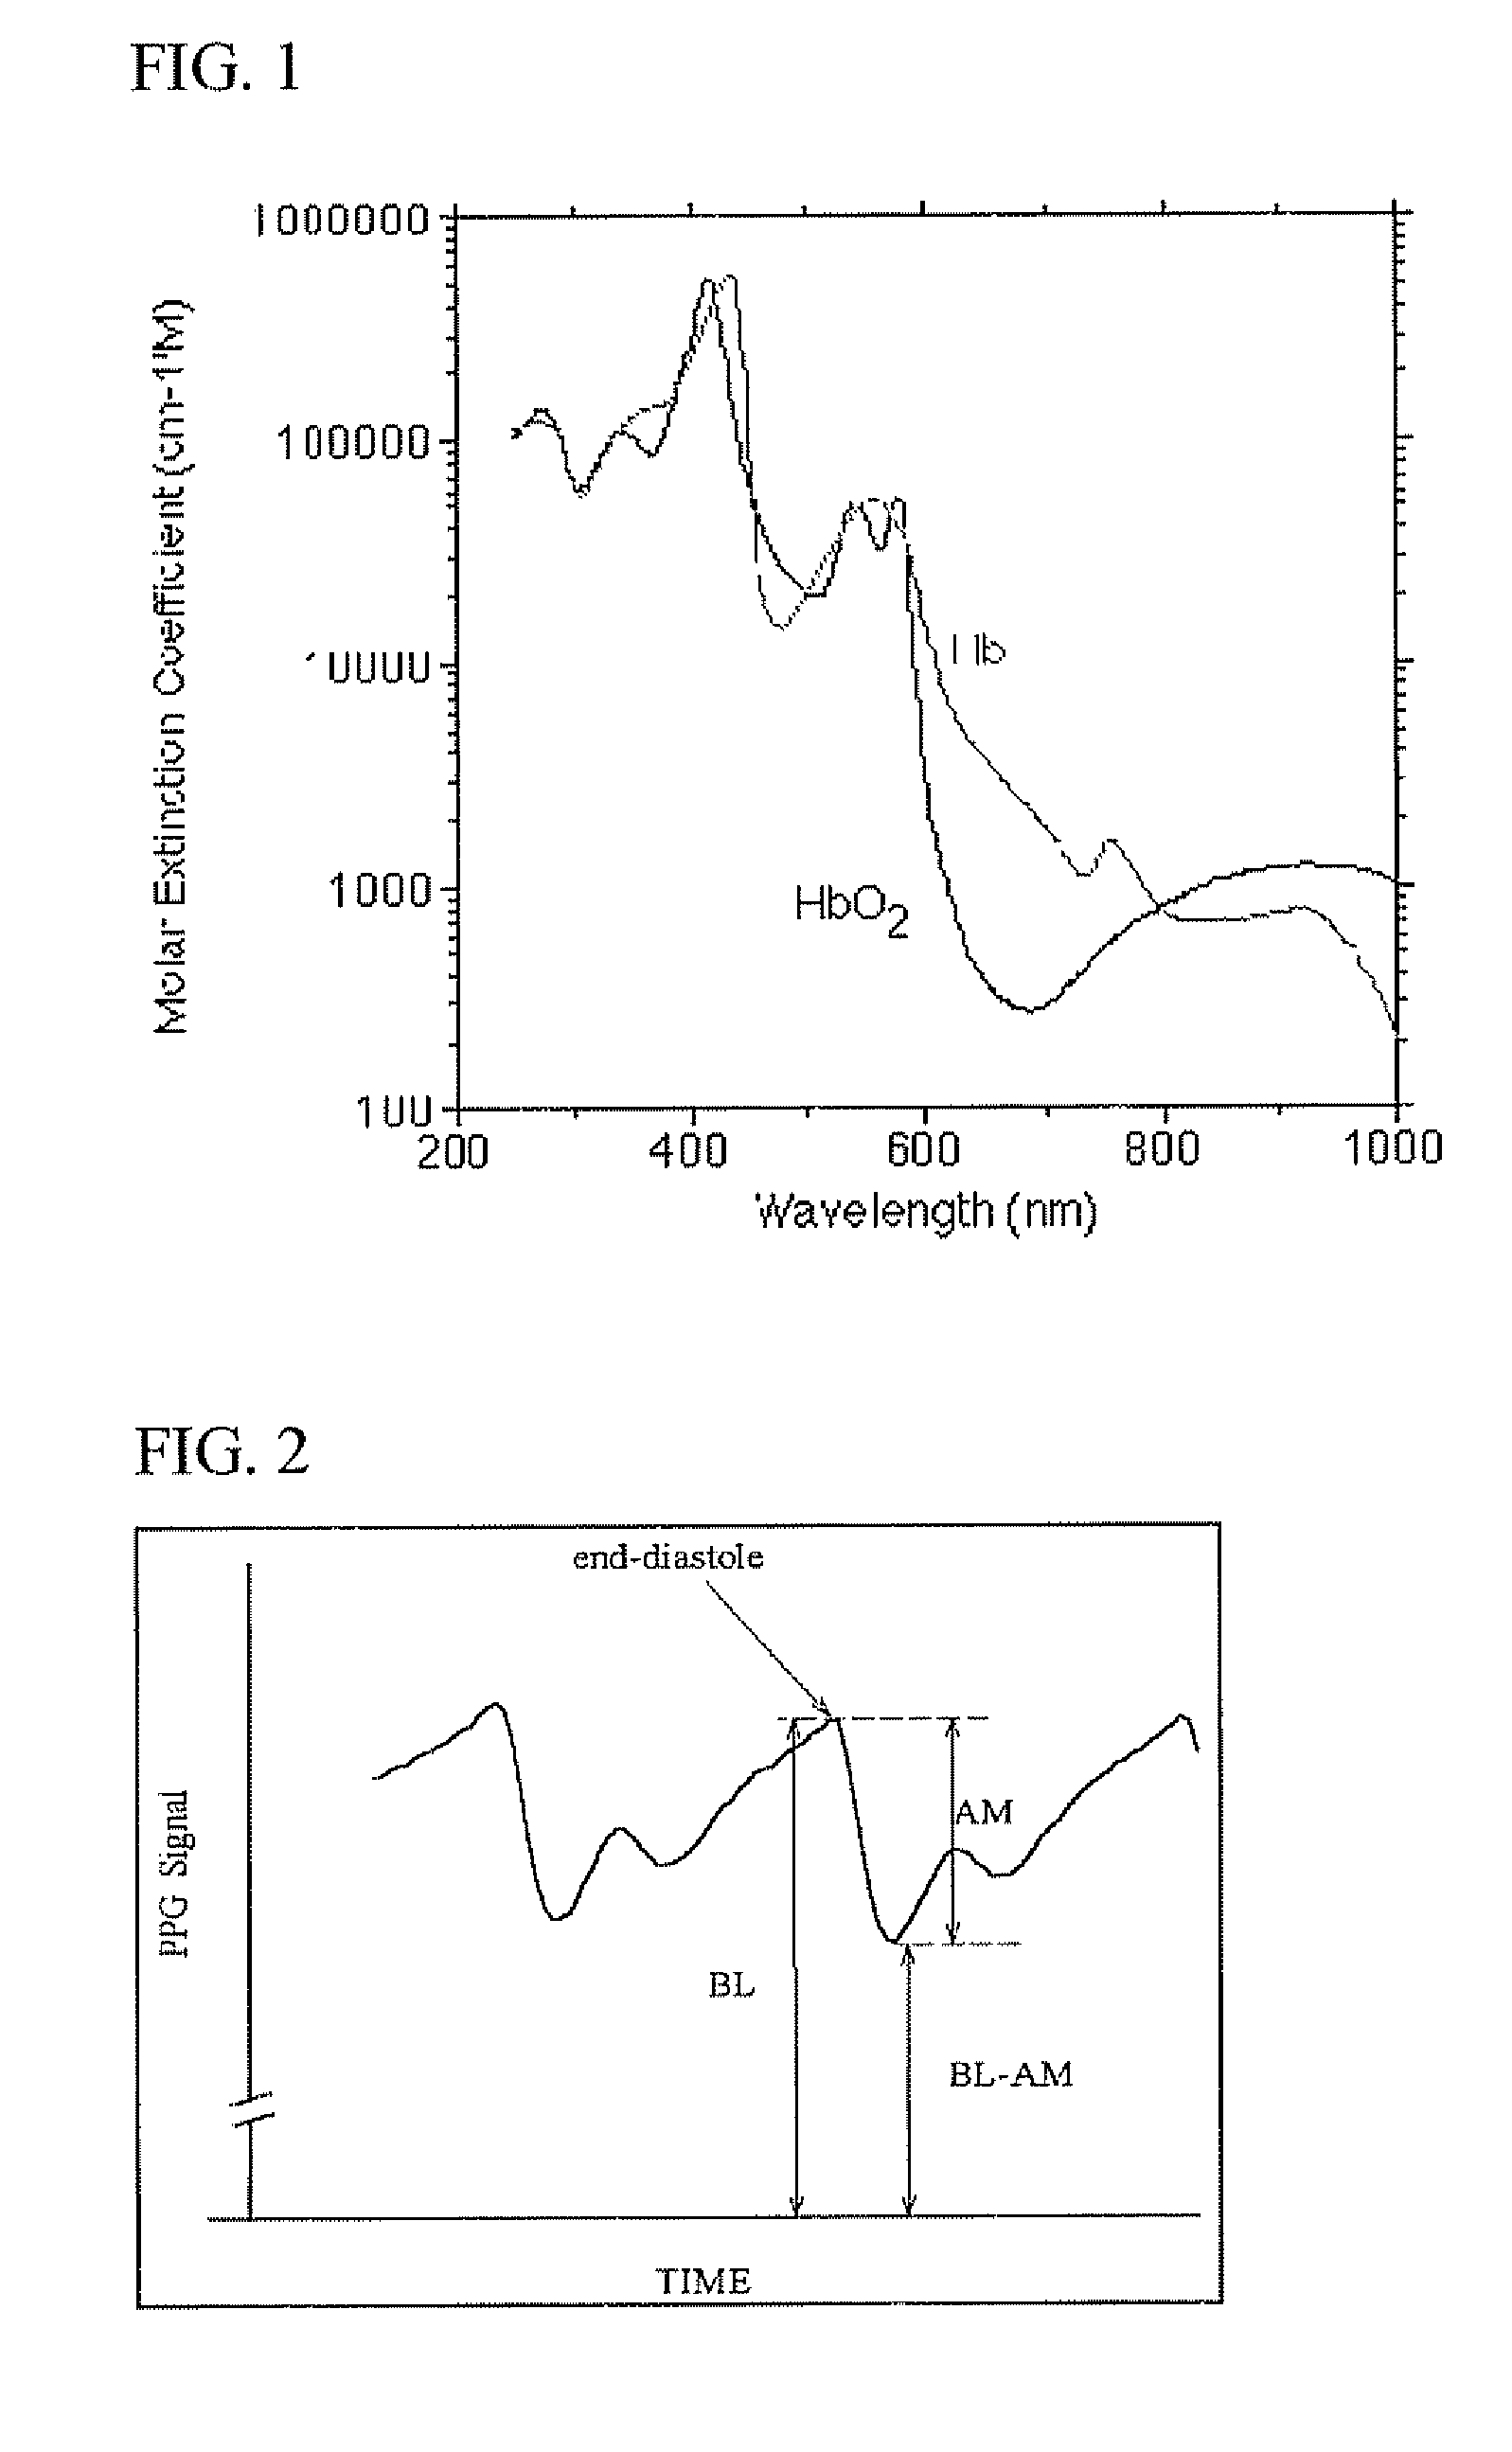 Modified Pulse Oximetry Technique For Measurement Of Oxygen Saturation In Arterial And Venous Blood